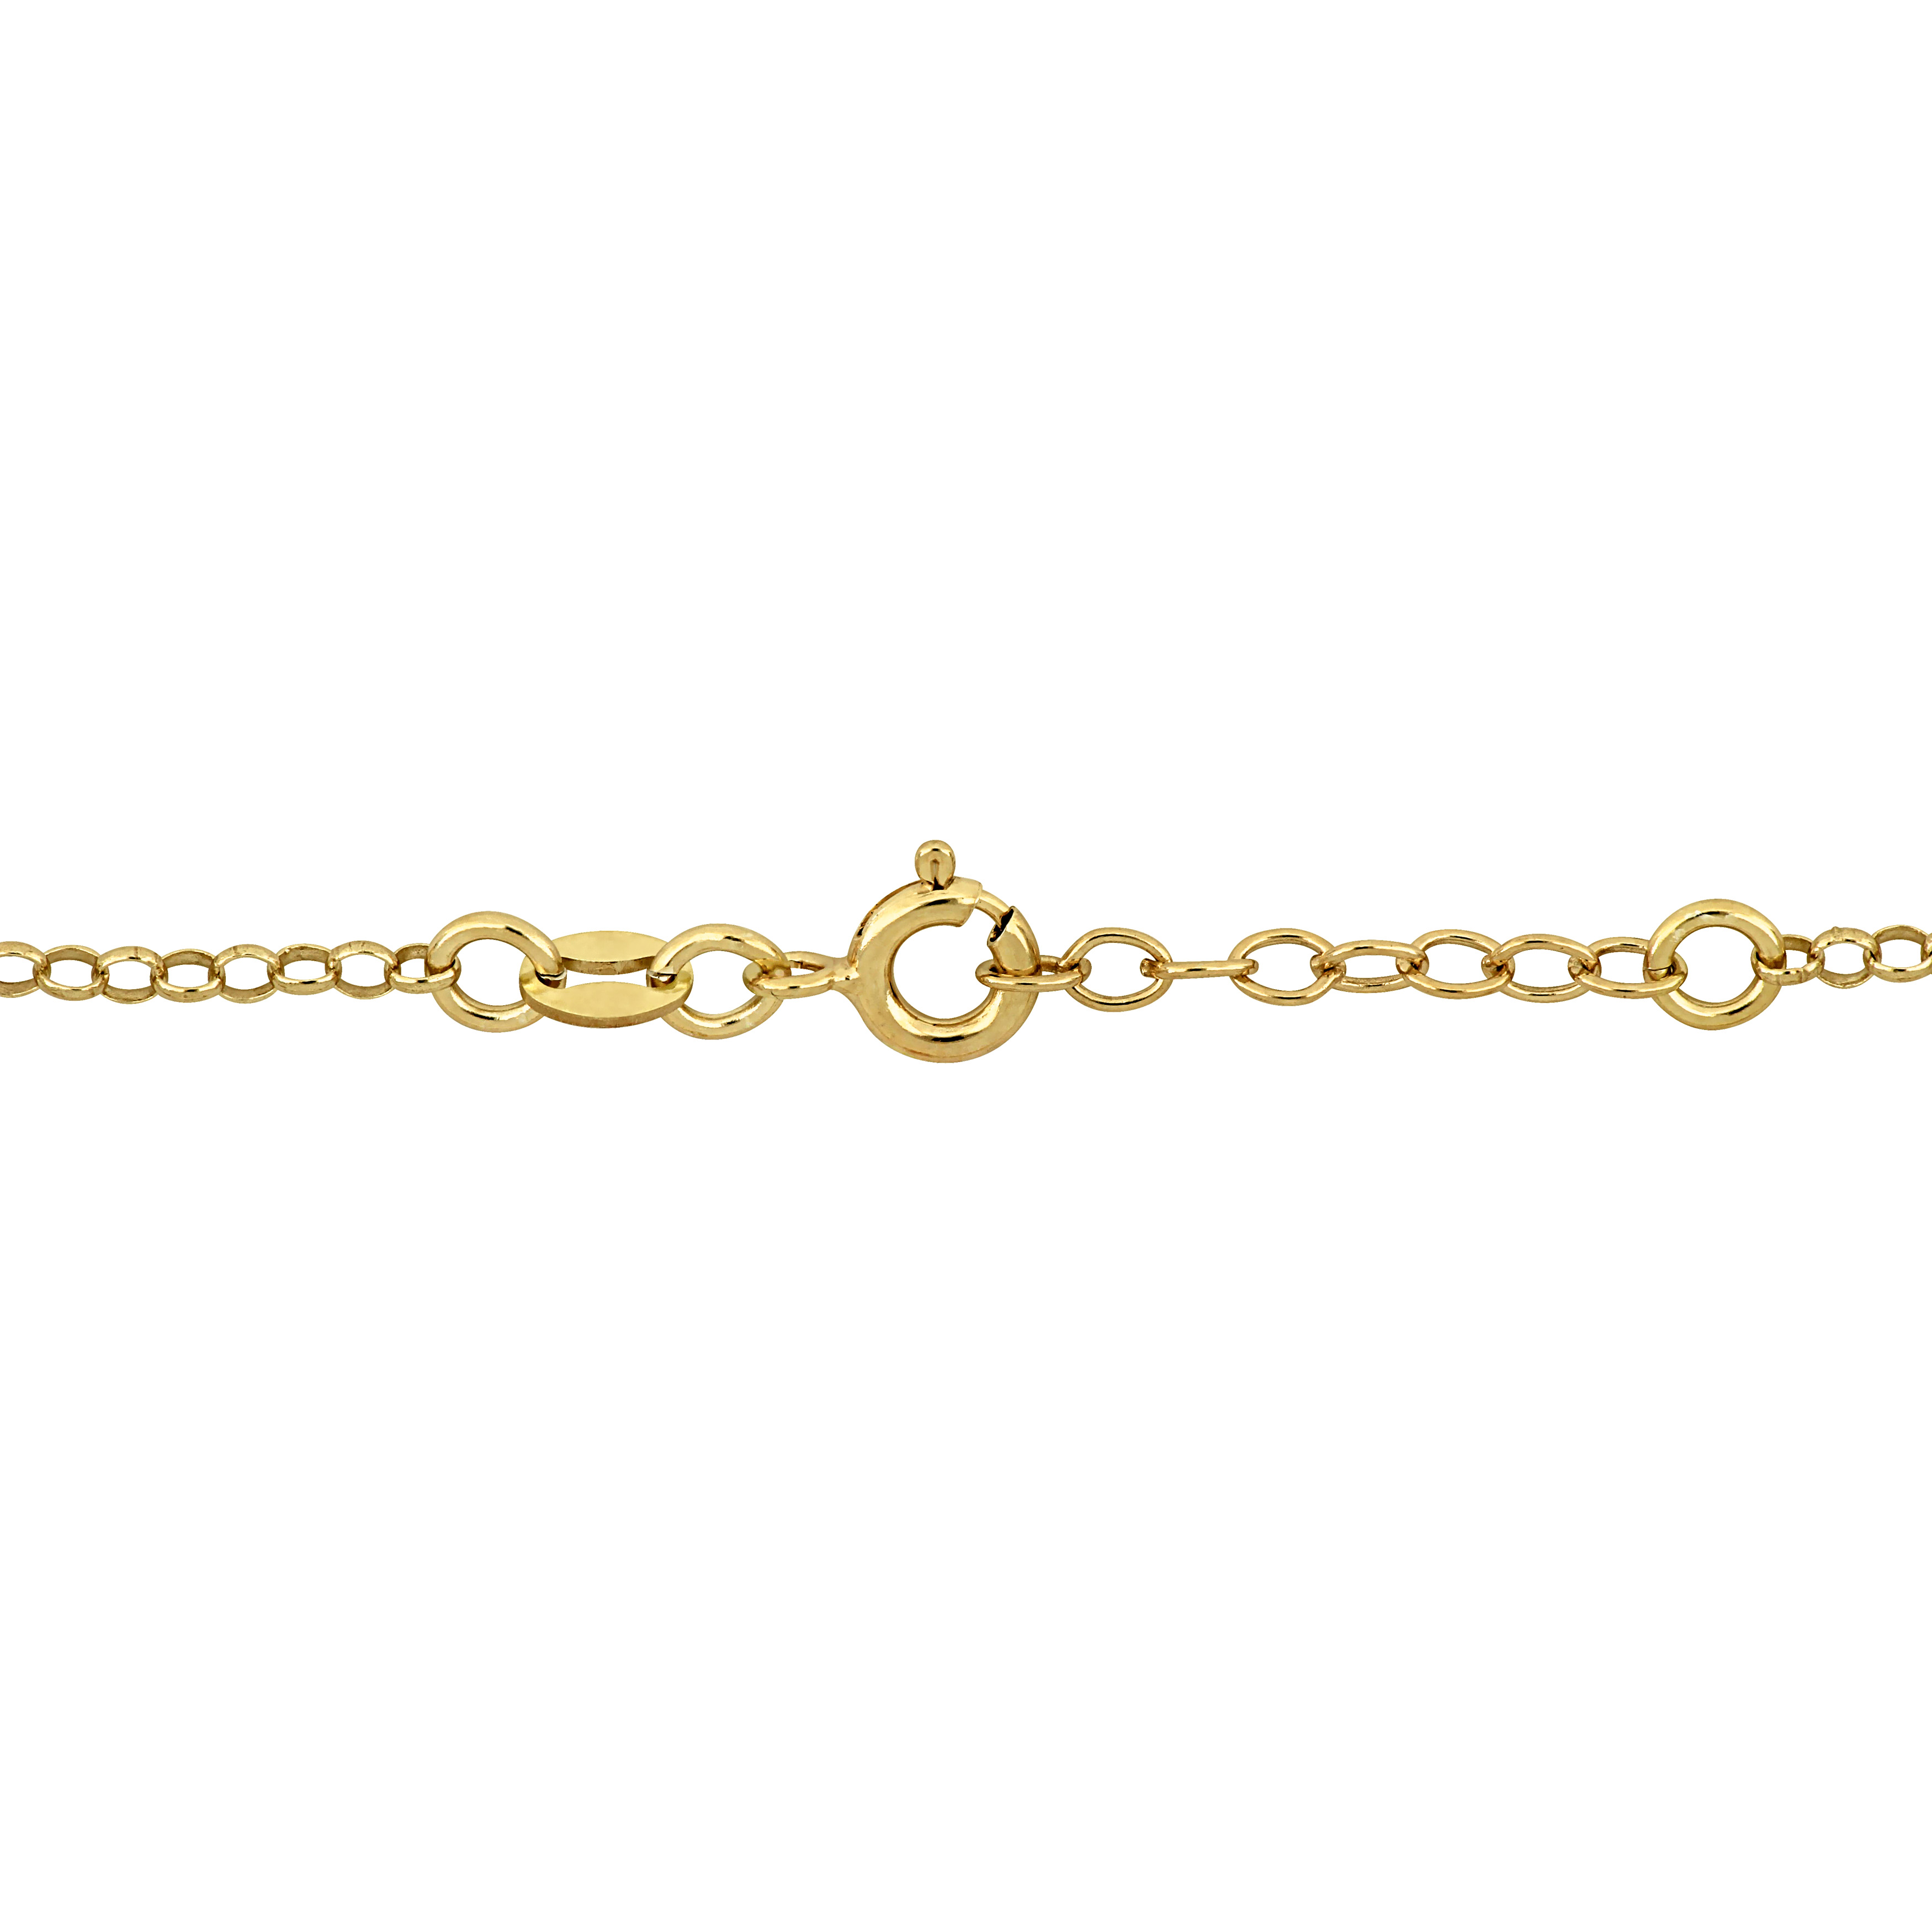 Enamel Dog Charm on 2mm Rolo Link Chain Station Bracelet in Yellow Plated Sterling Silver - 6.5+0.5 in.